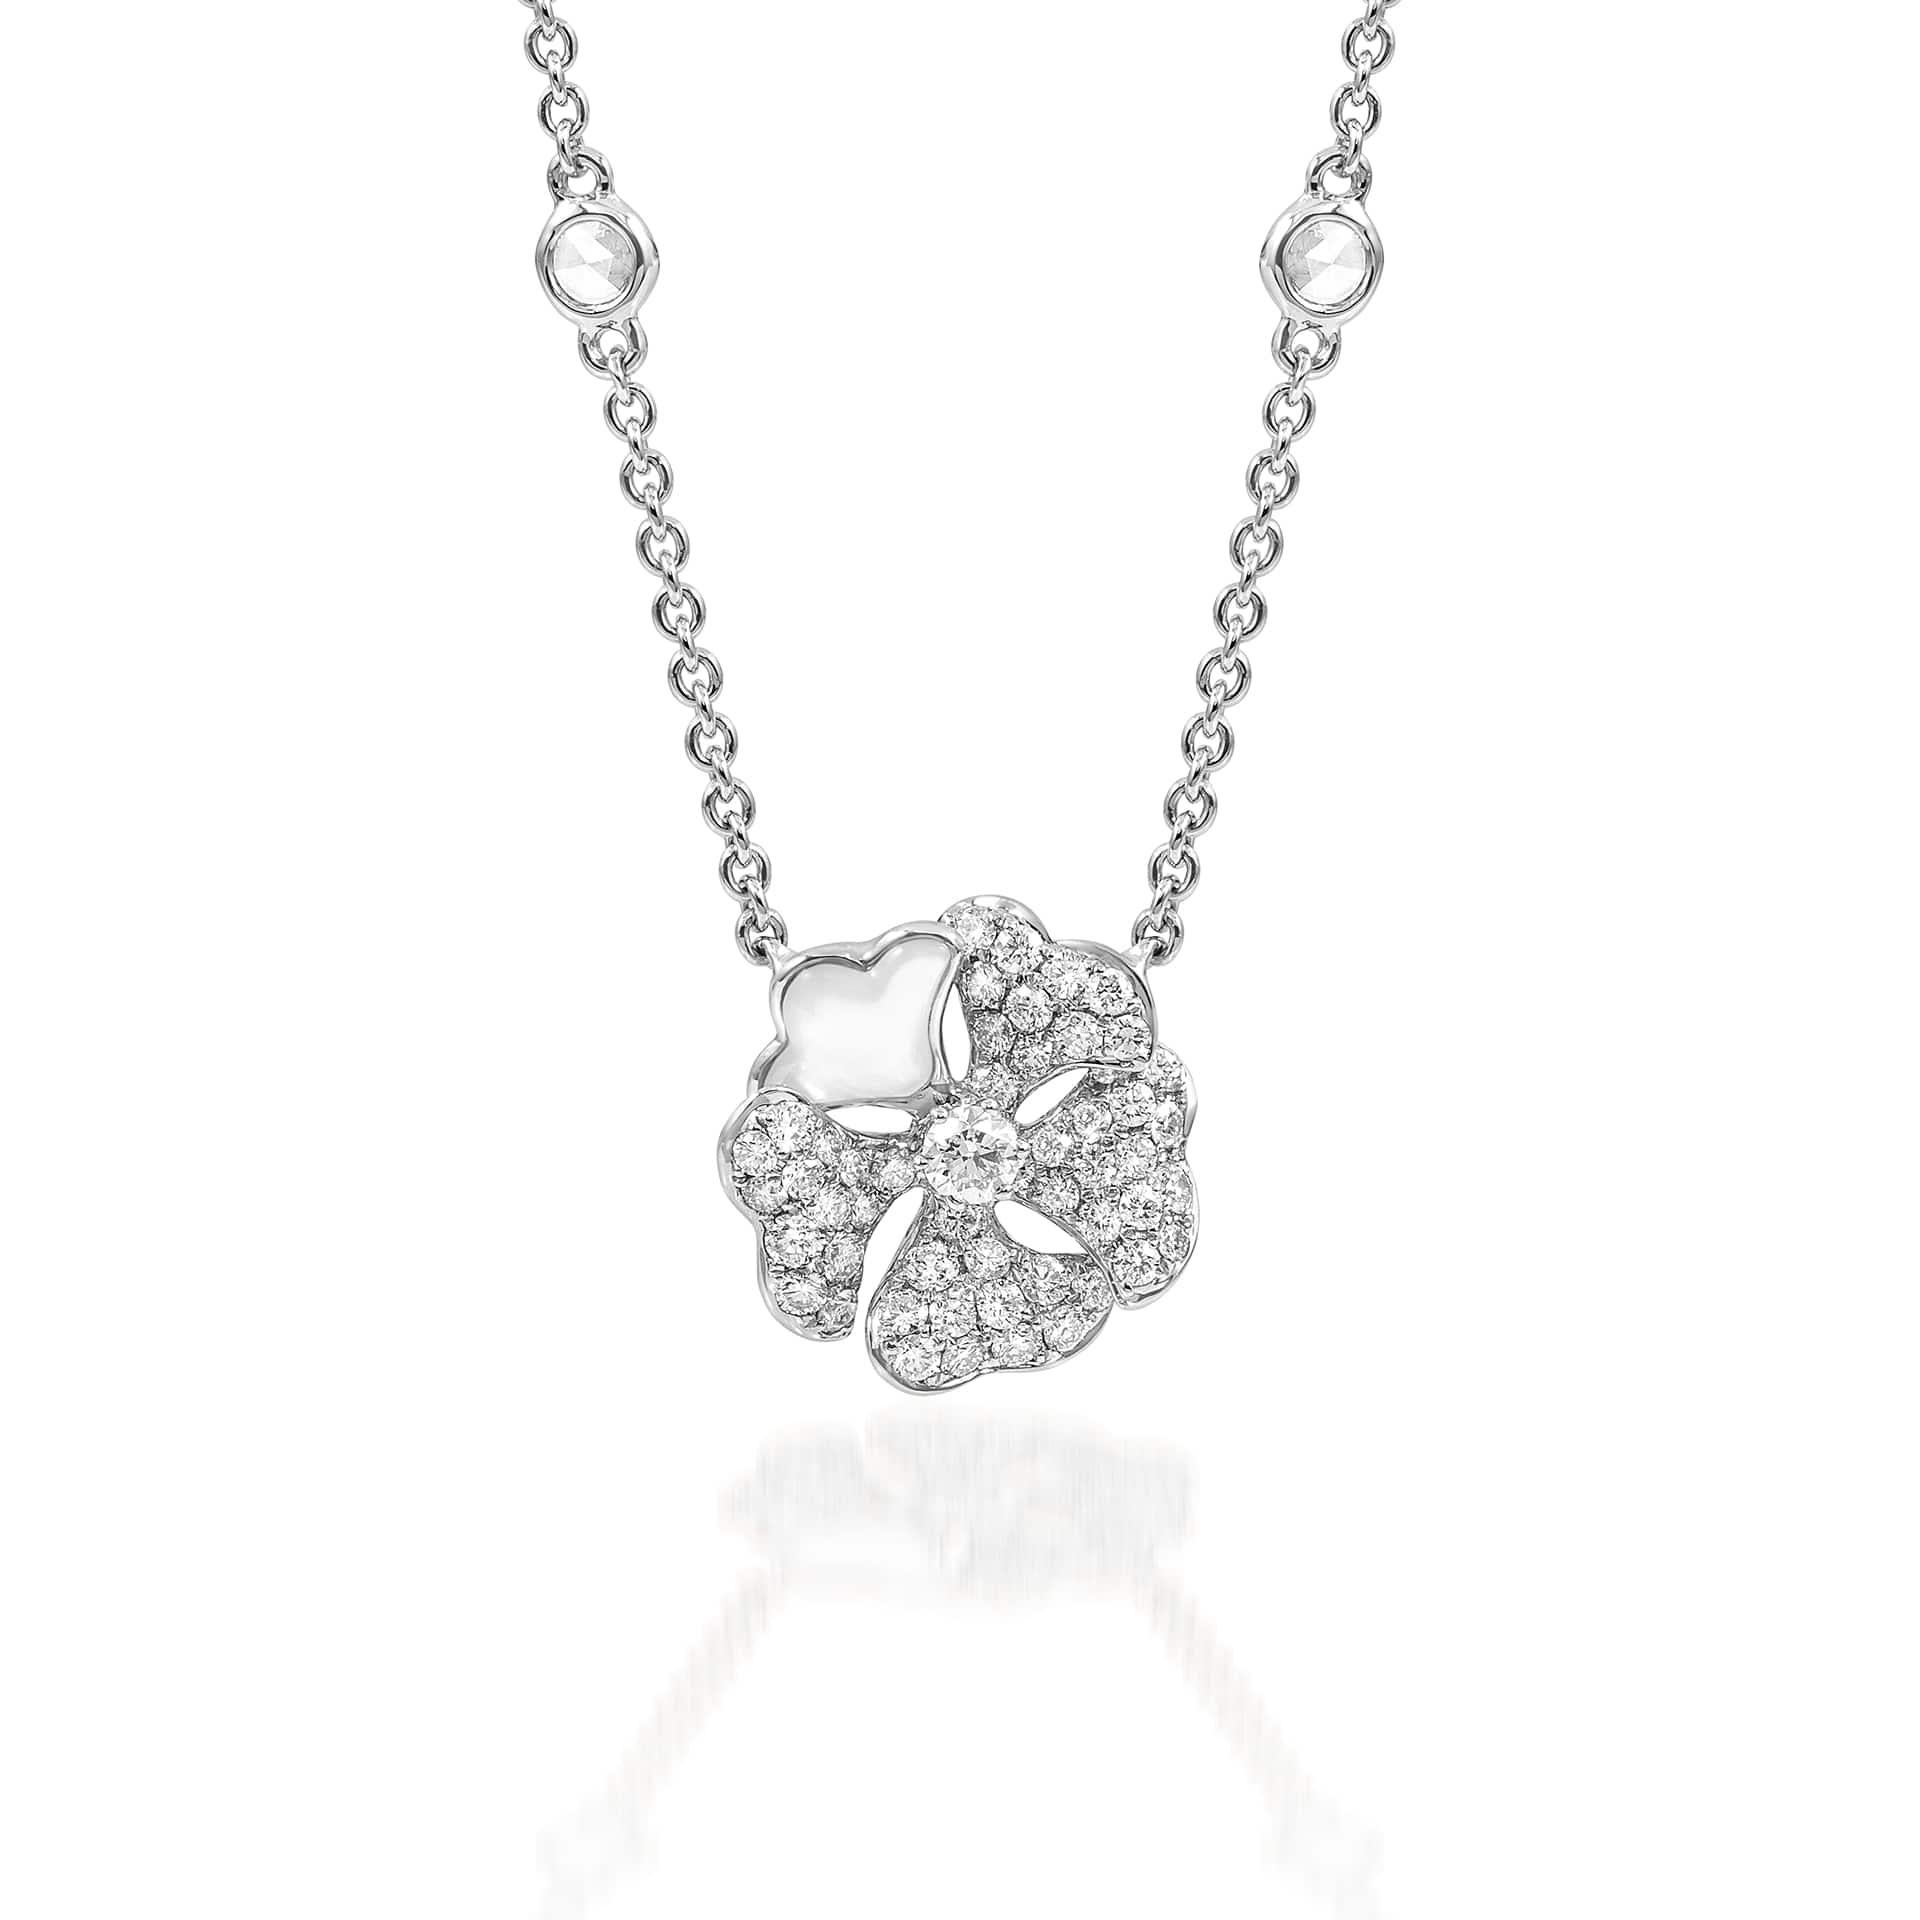 Bloom Pavé Diamond and Mother-of-Pearl Flower Necklace in 18K White Gold

Inspired by the exquisite petals of the alpine cinquefoil flower, the Bloom collection combines the richness of diamonds and precious metals with the light versatility of this